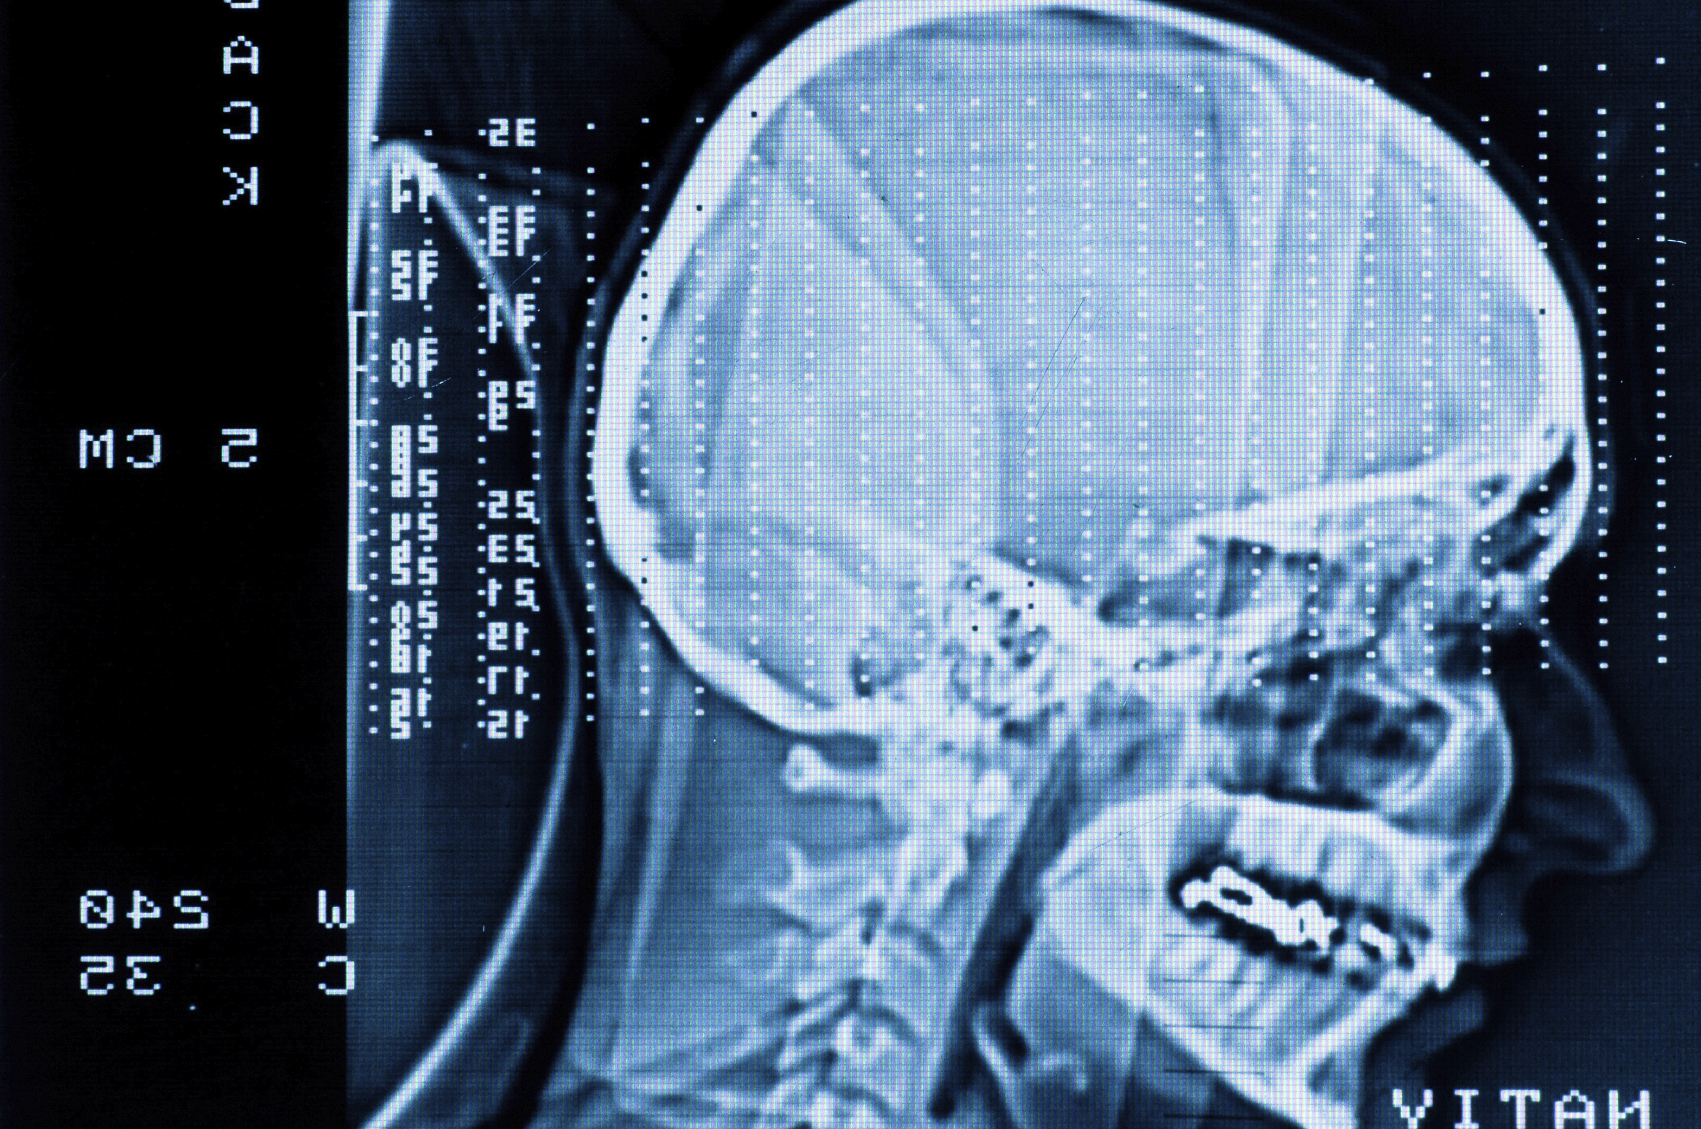 Closeup of a CT scan with brain and skull on it